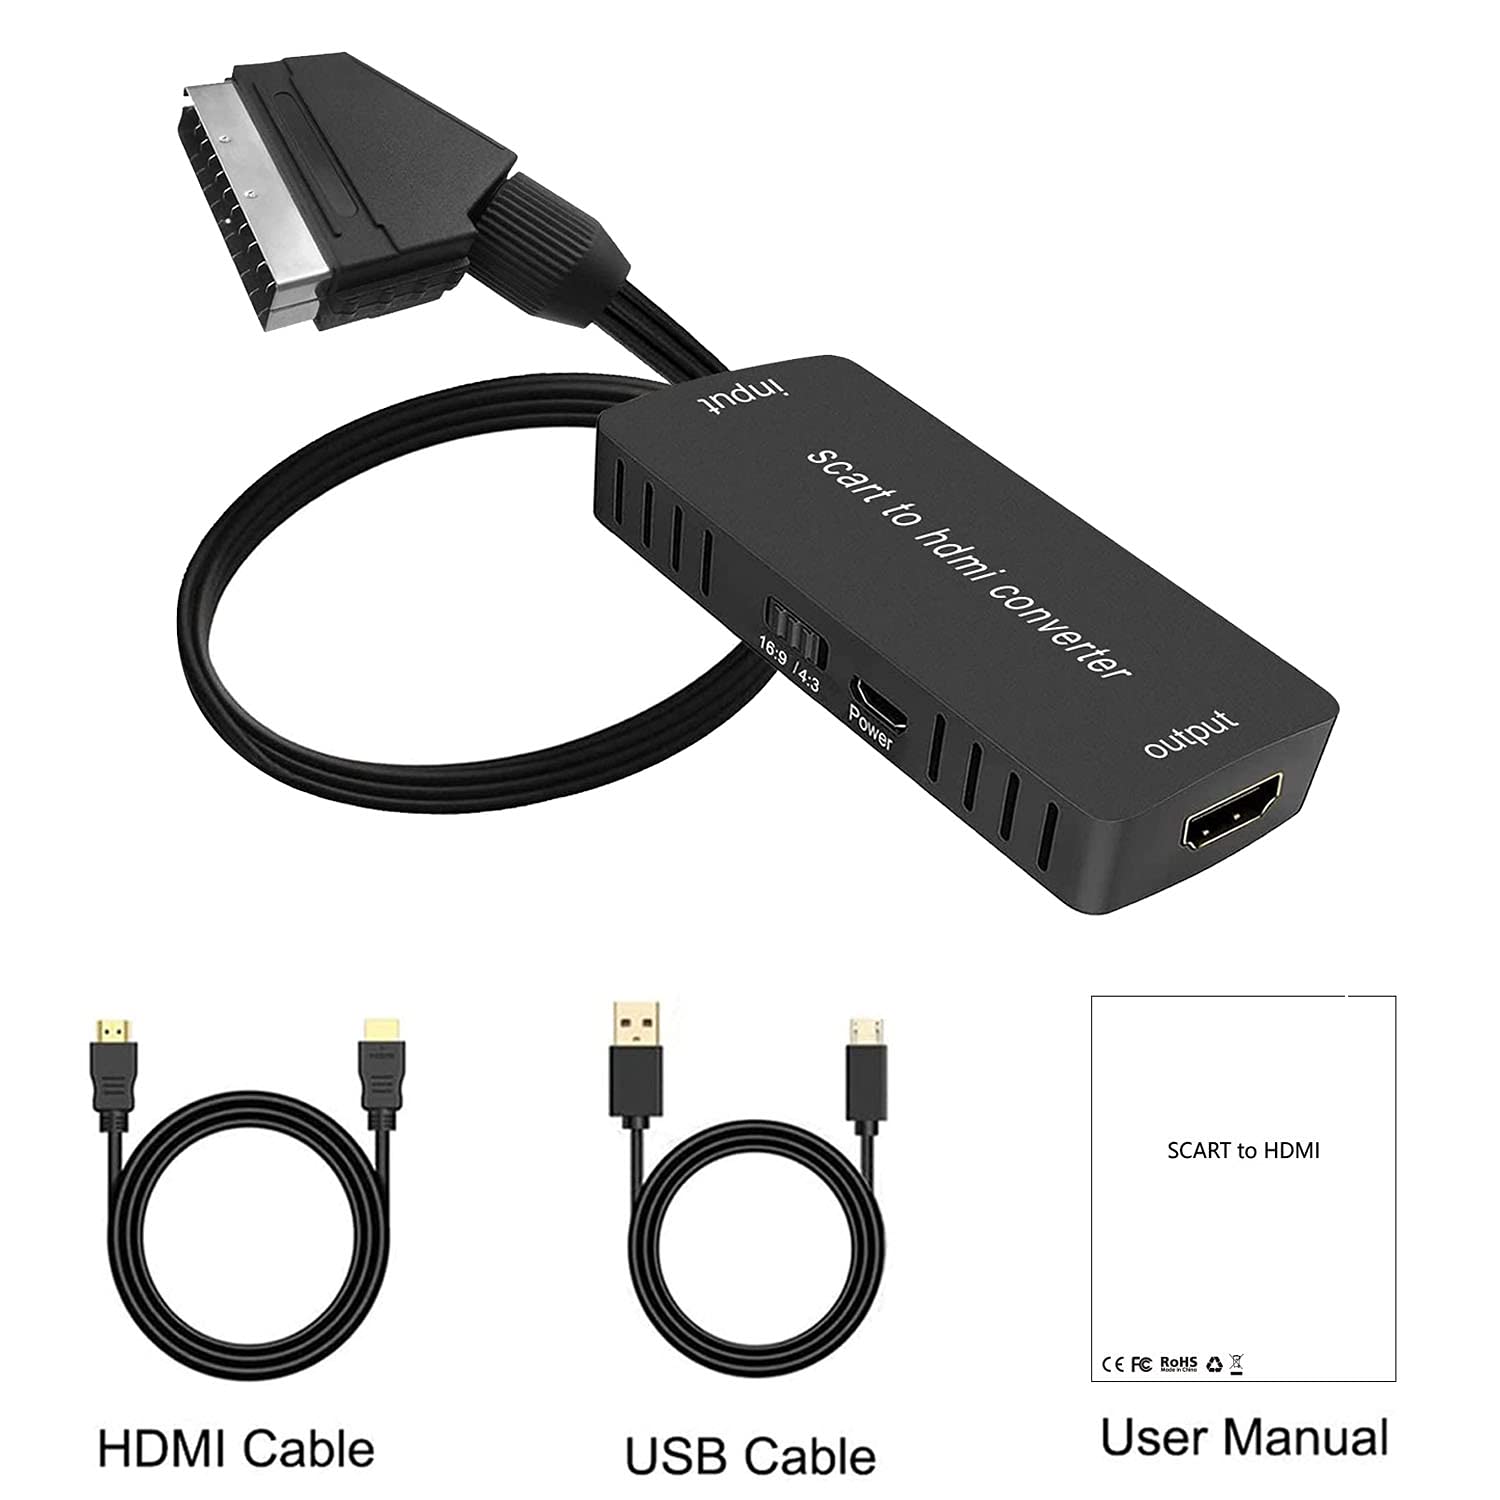 Scart to HDMI Converter, Wrugste Scart input HDMI output 16:9/4:3 Video Audio Converter Adapter with HDMI cable for HDTV Monitor Projector STB VHS Xbox Sky Blu-ray DVD Player